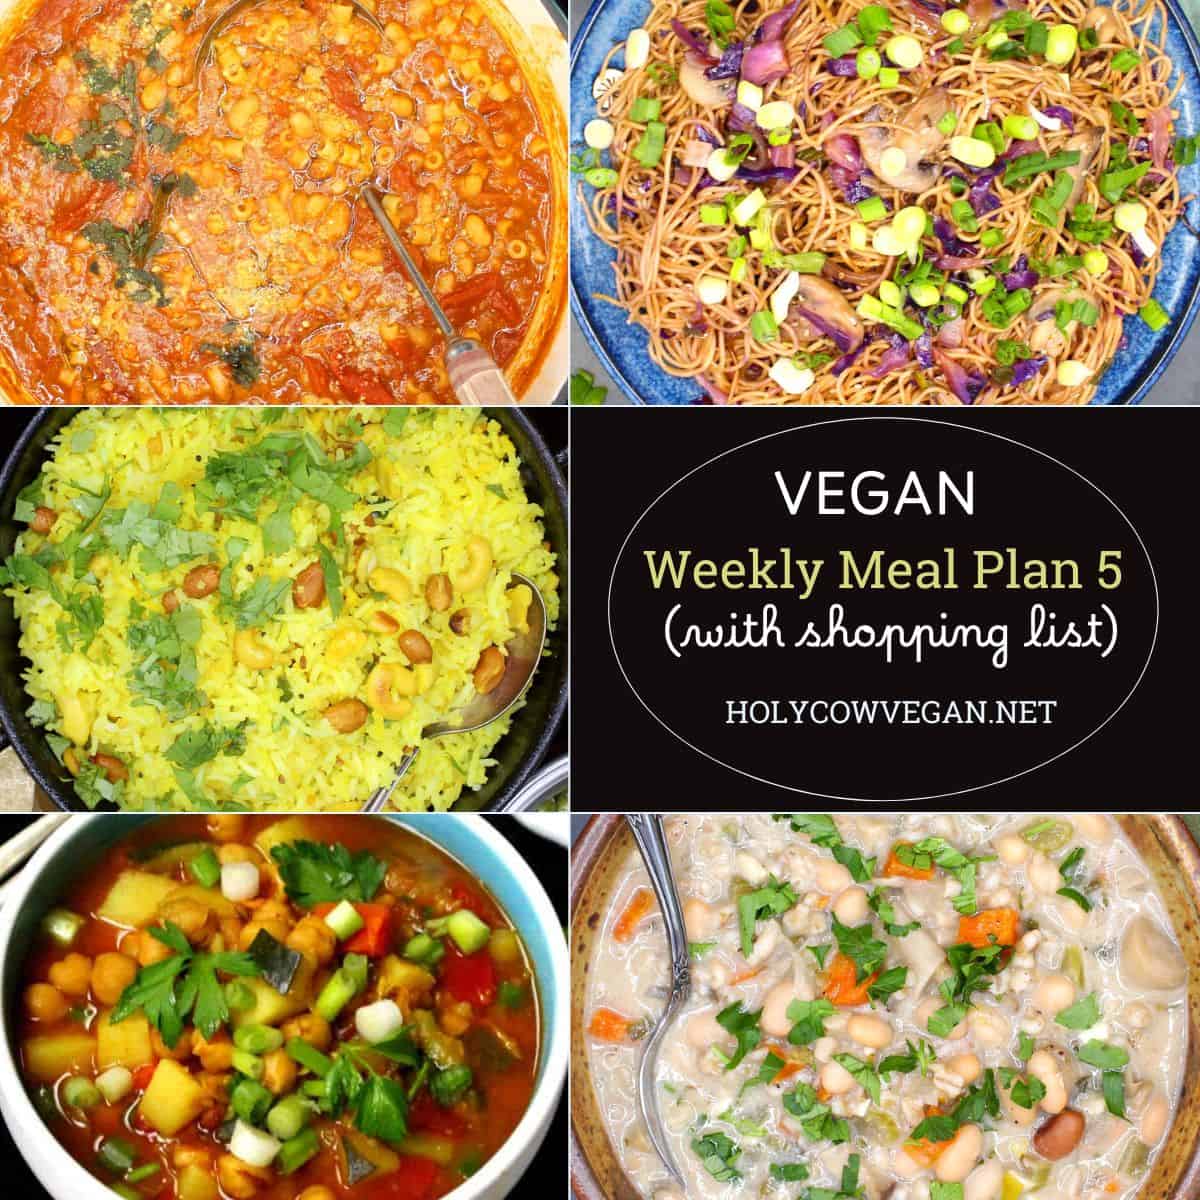 Images of five vegan dinners with text that says "vegan weekly meal plan 5, with shopping list, holycowvegan.net".